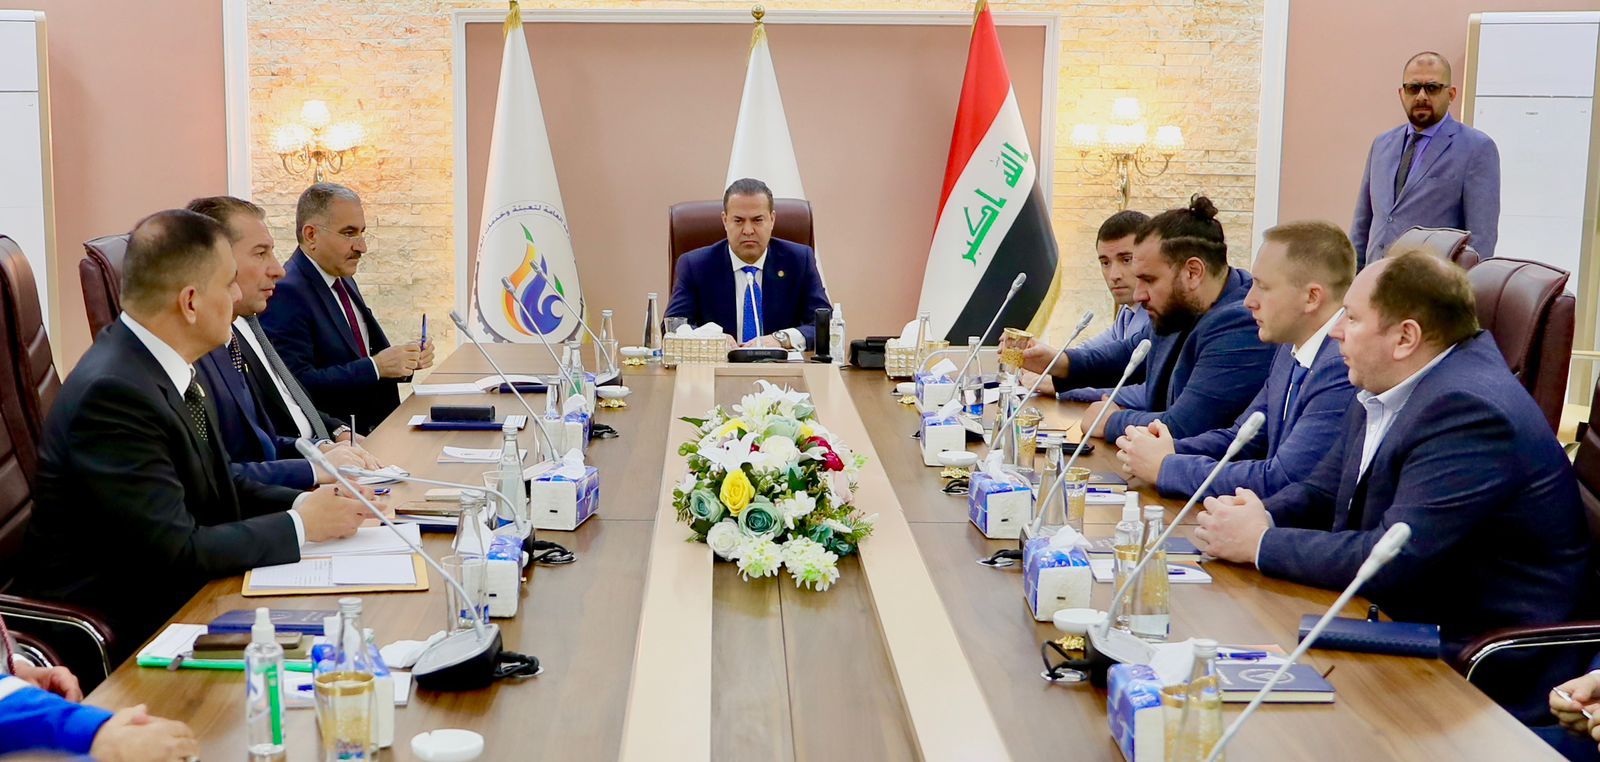 Iraq, Gazprom discuss expanding household gas services